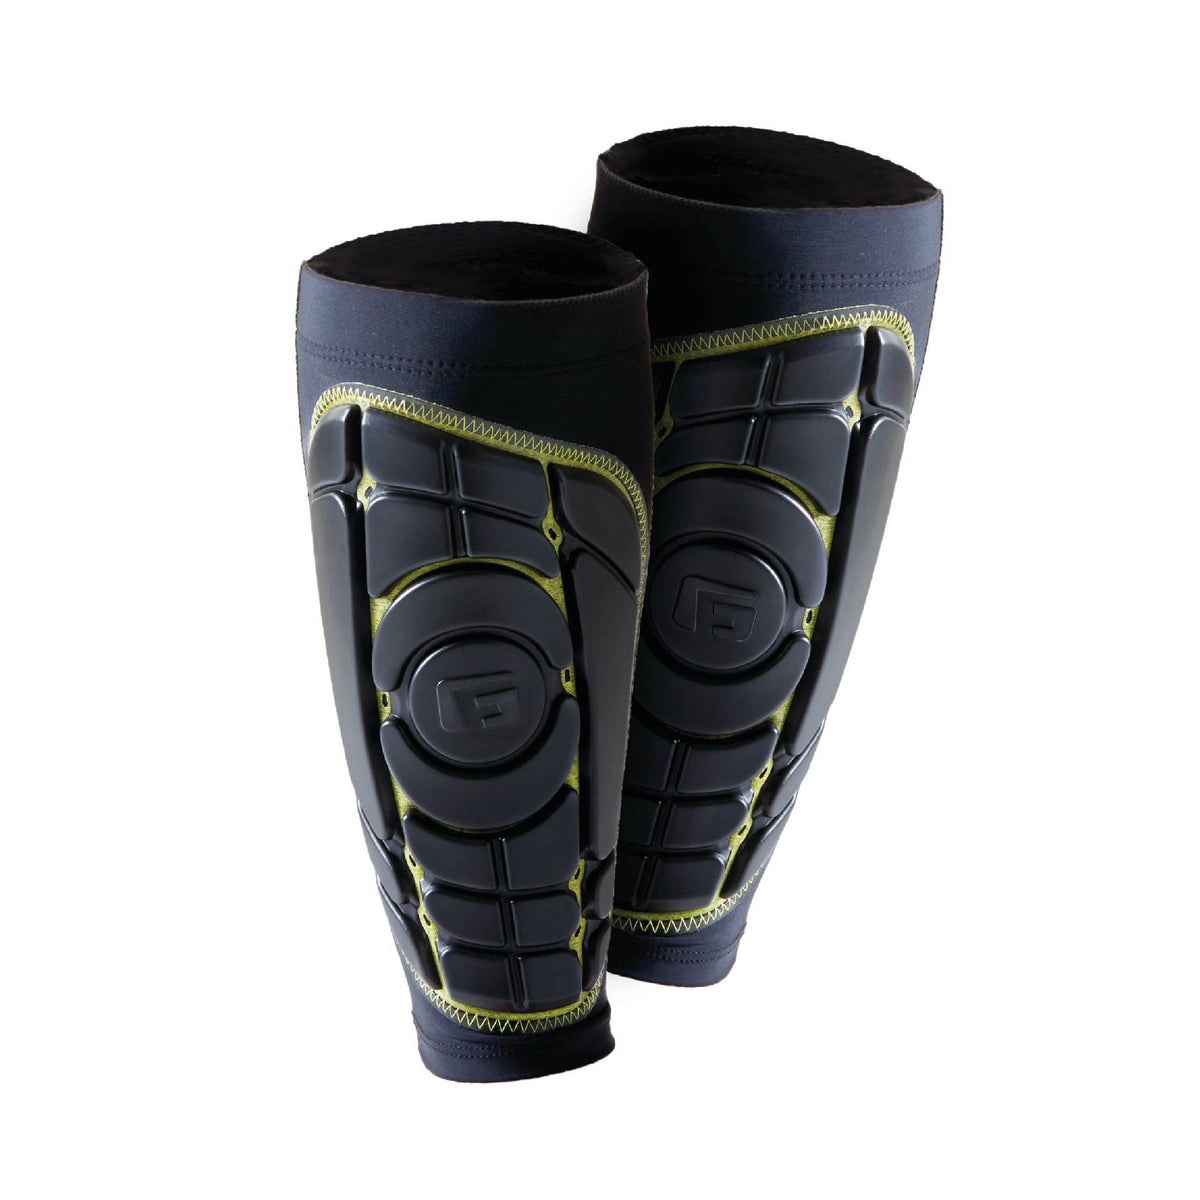 G Form Shin Guards Review